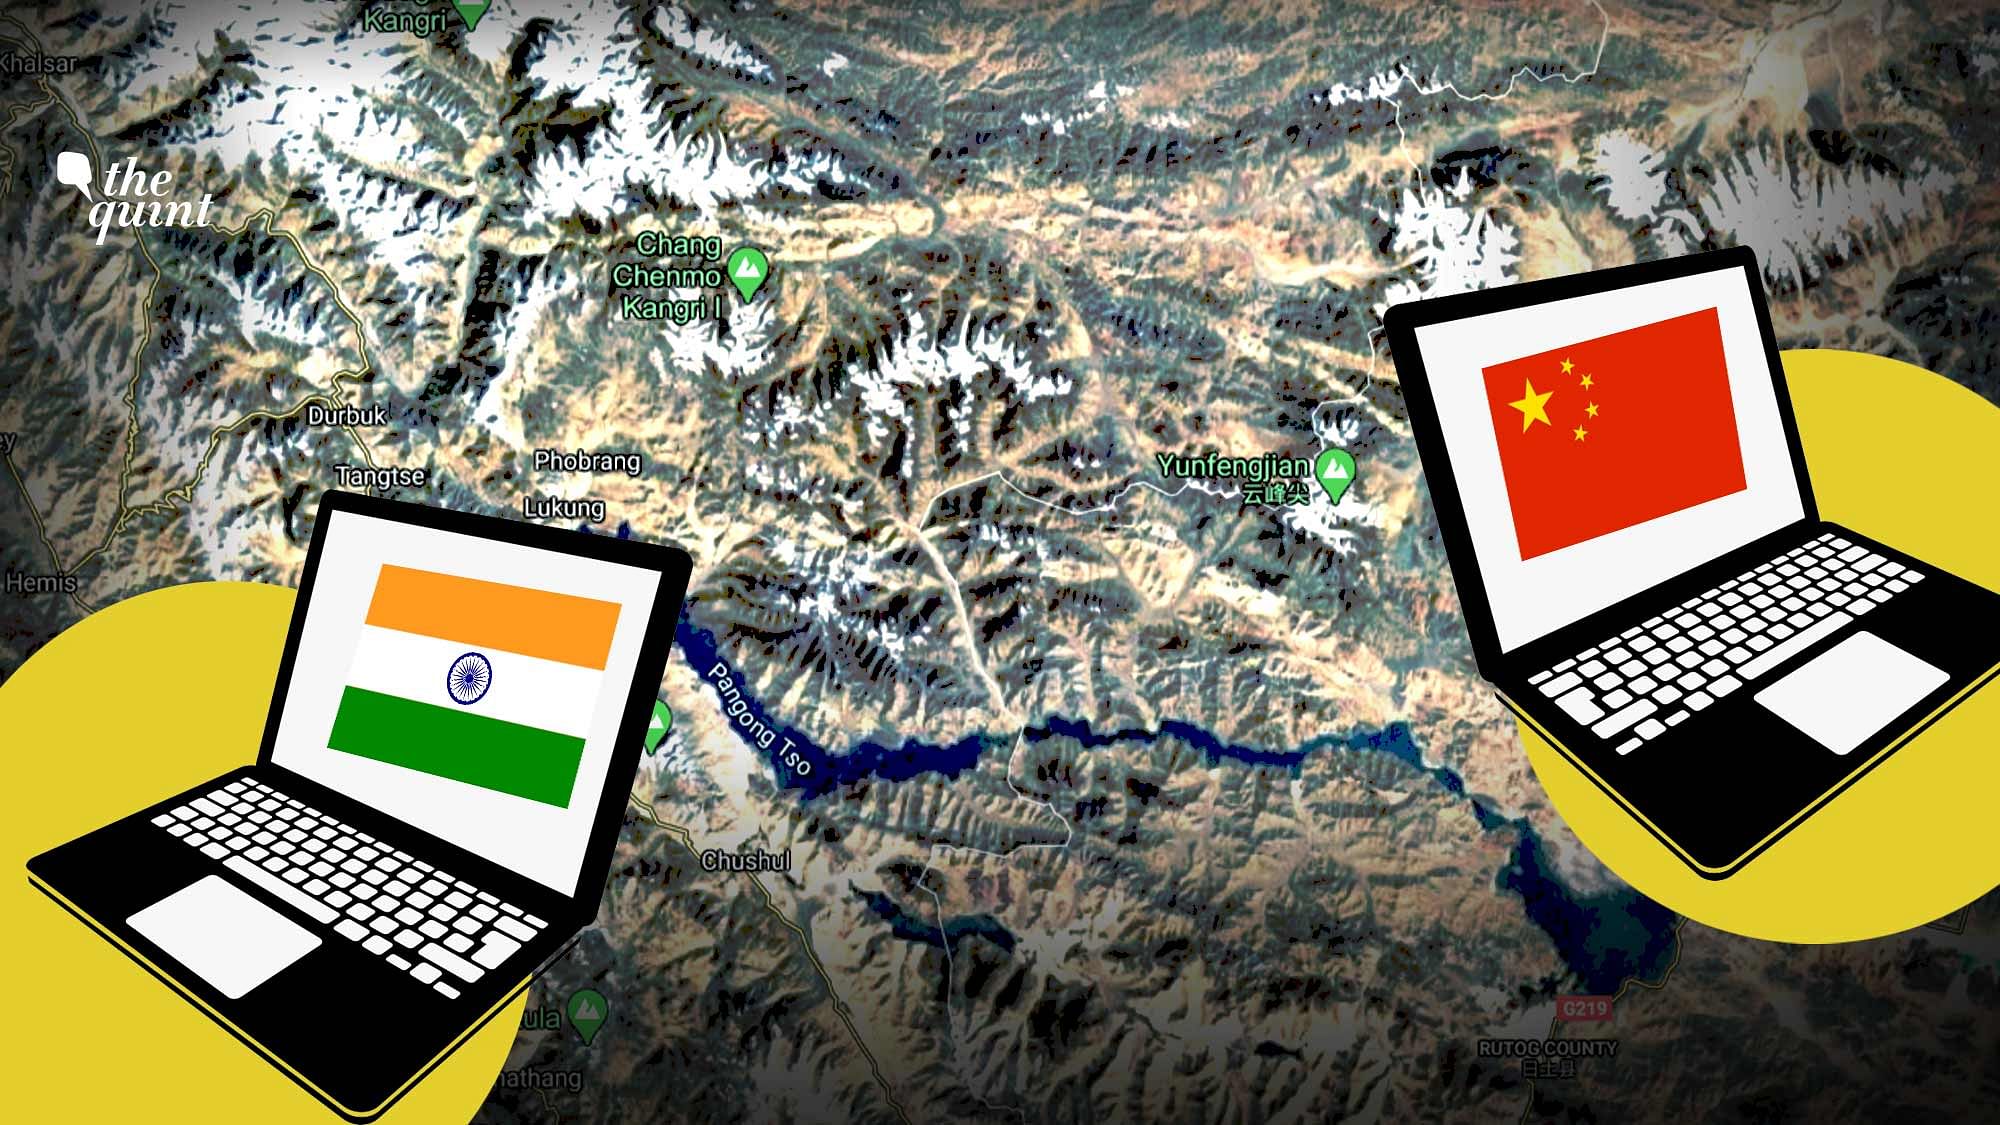  <p>Indian firms and government organisations are trying to get protection against cyber attacks and fix known vulnerabilities. Tension between India and China at the LAC in Ladakh has led to fear of a Chinese 'Cyber Offensive'</p>